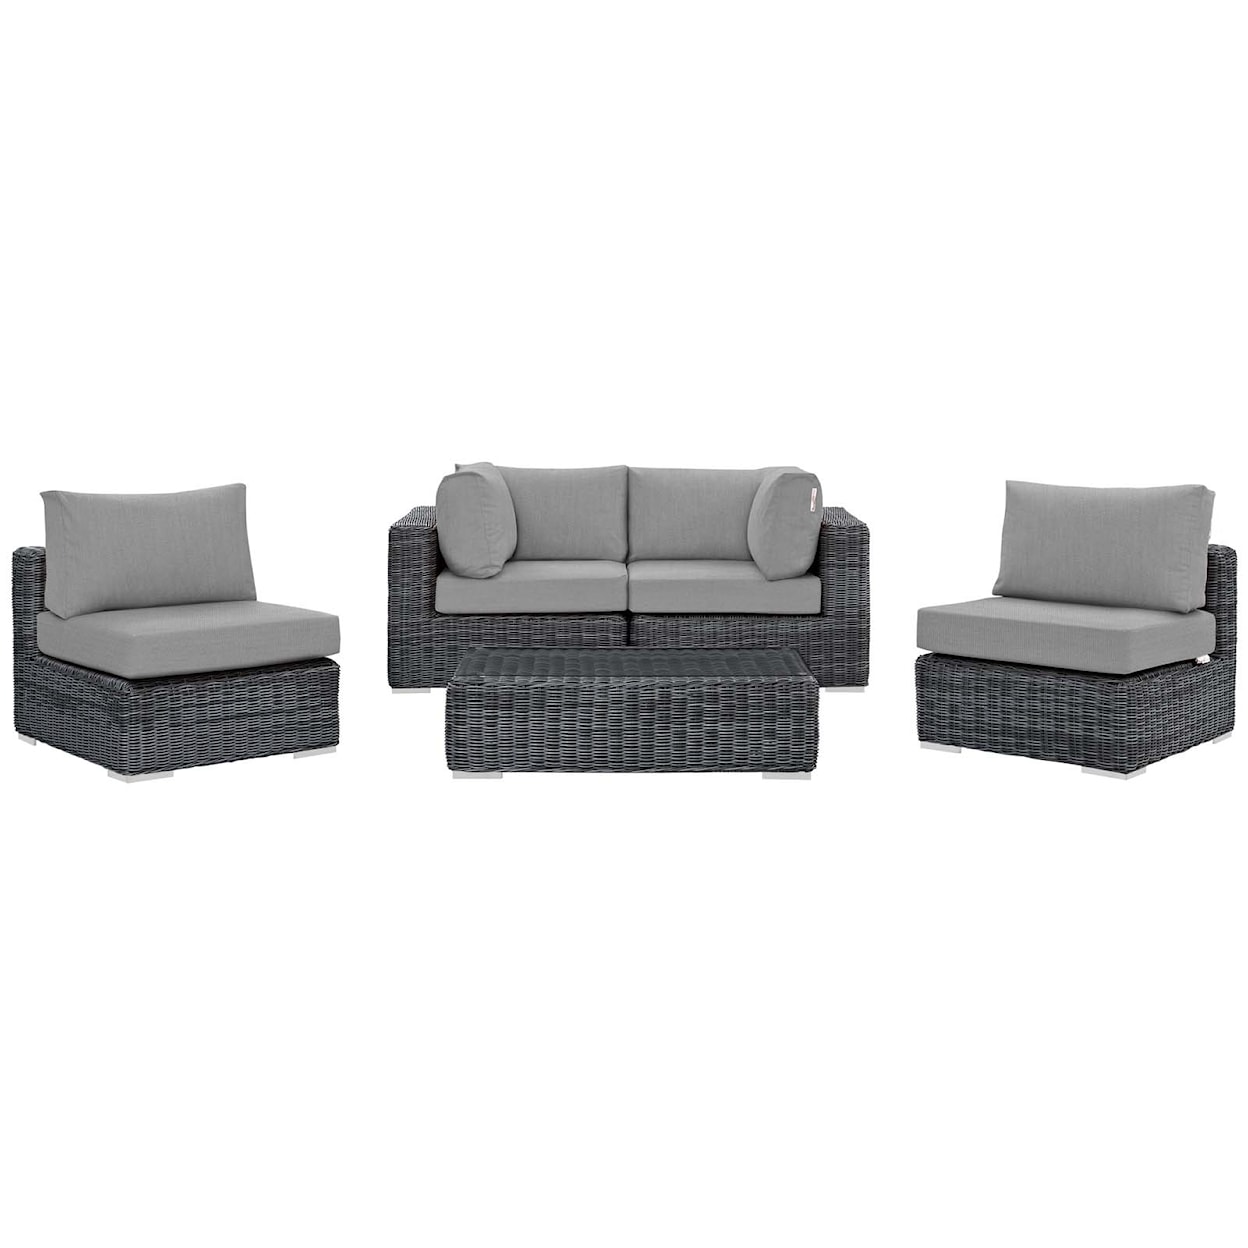 Modway Summon Outdoor 5 Piece Sectional Set